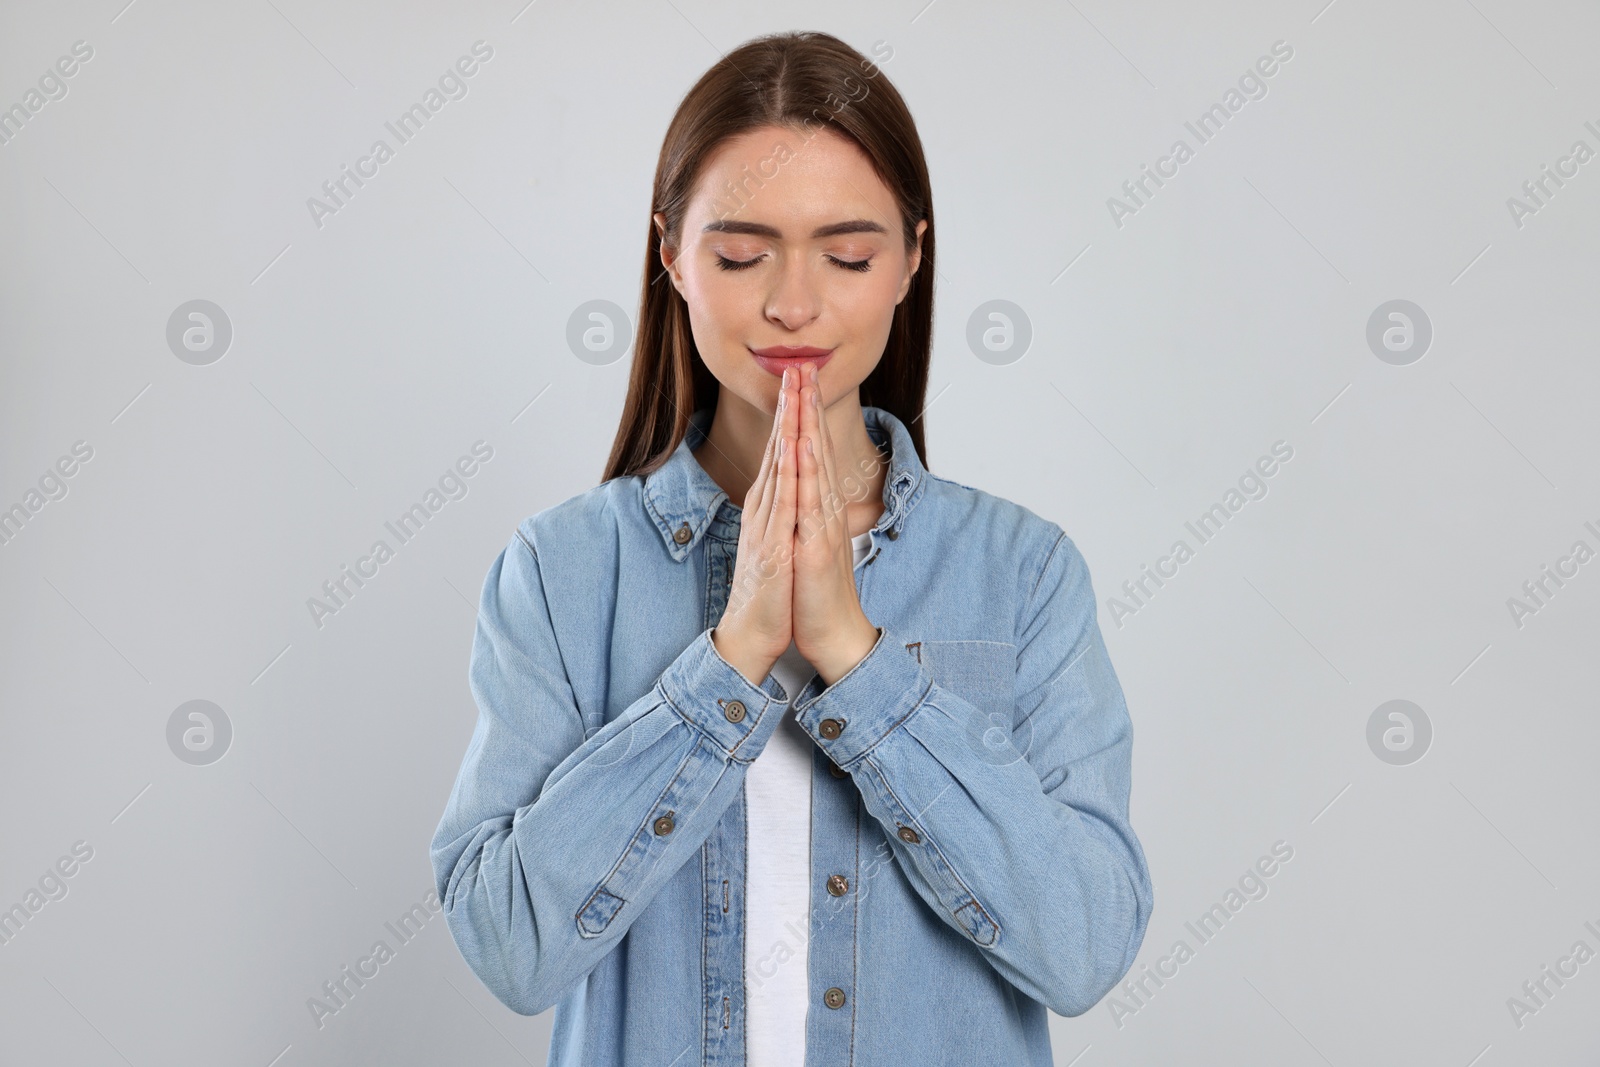 Photo of Woman with clasped hands praying on light grey background